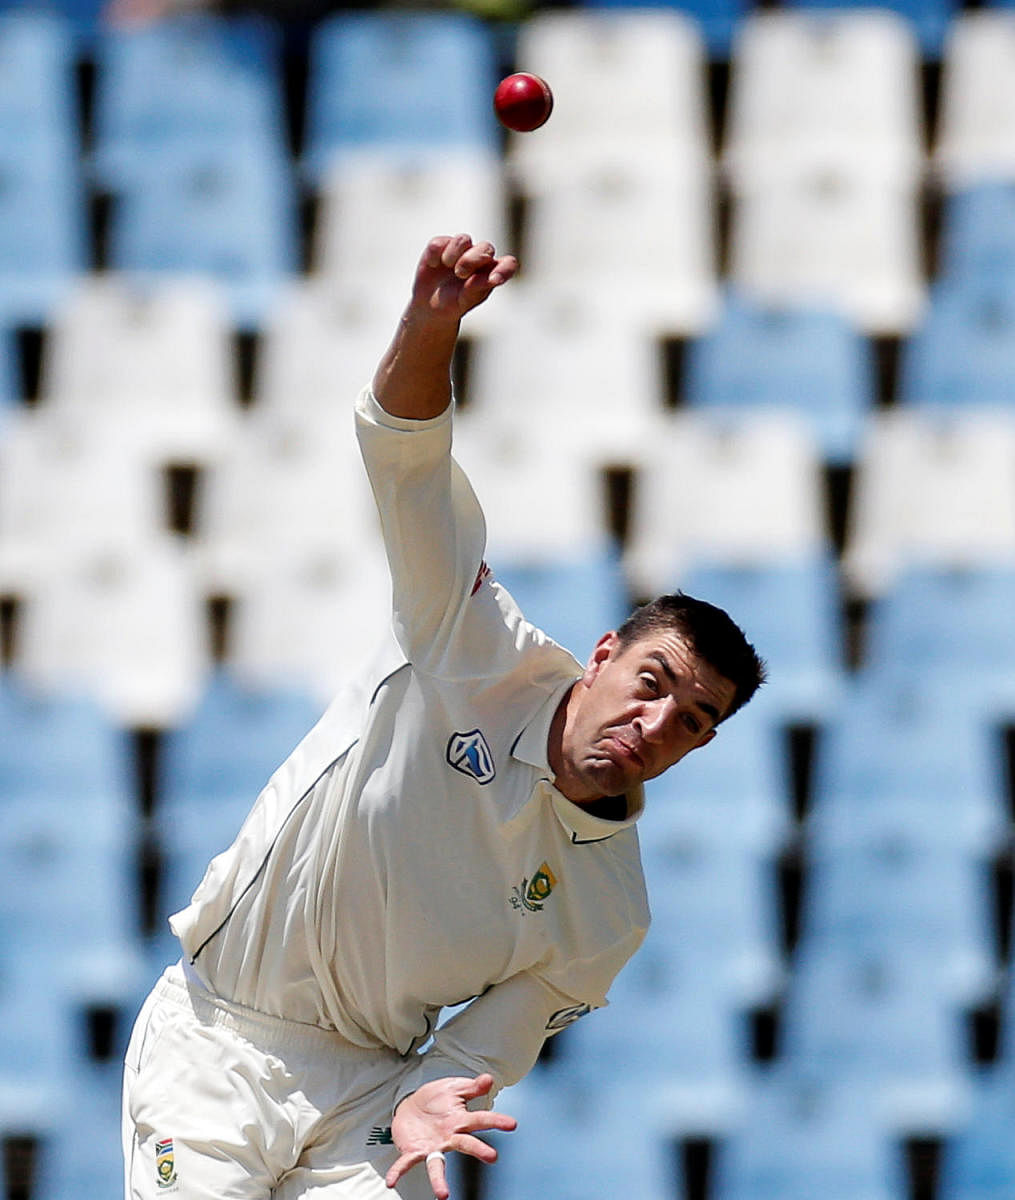 South Africa skipper Faf du Plessis lavished praise on Duanne Olivier (in pic), saying the seamer brings a unique variety to a world-class pace attack.